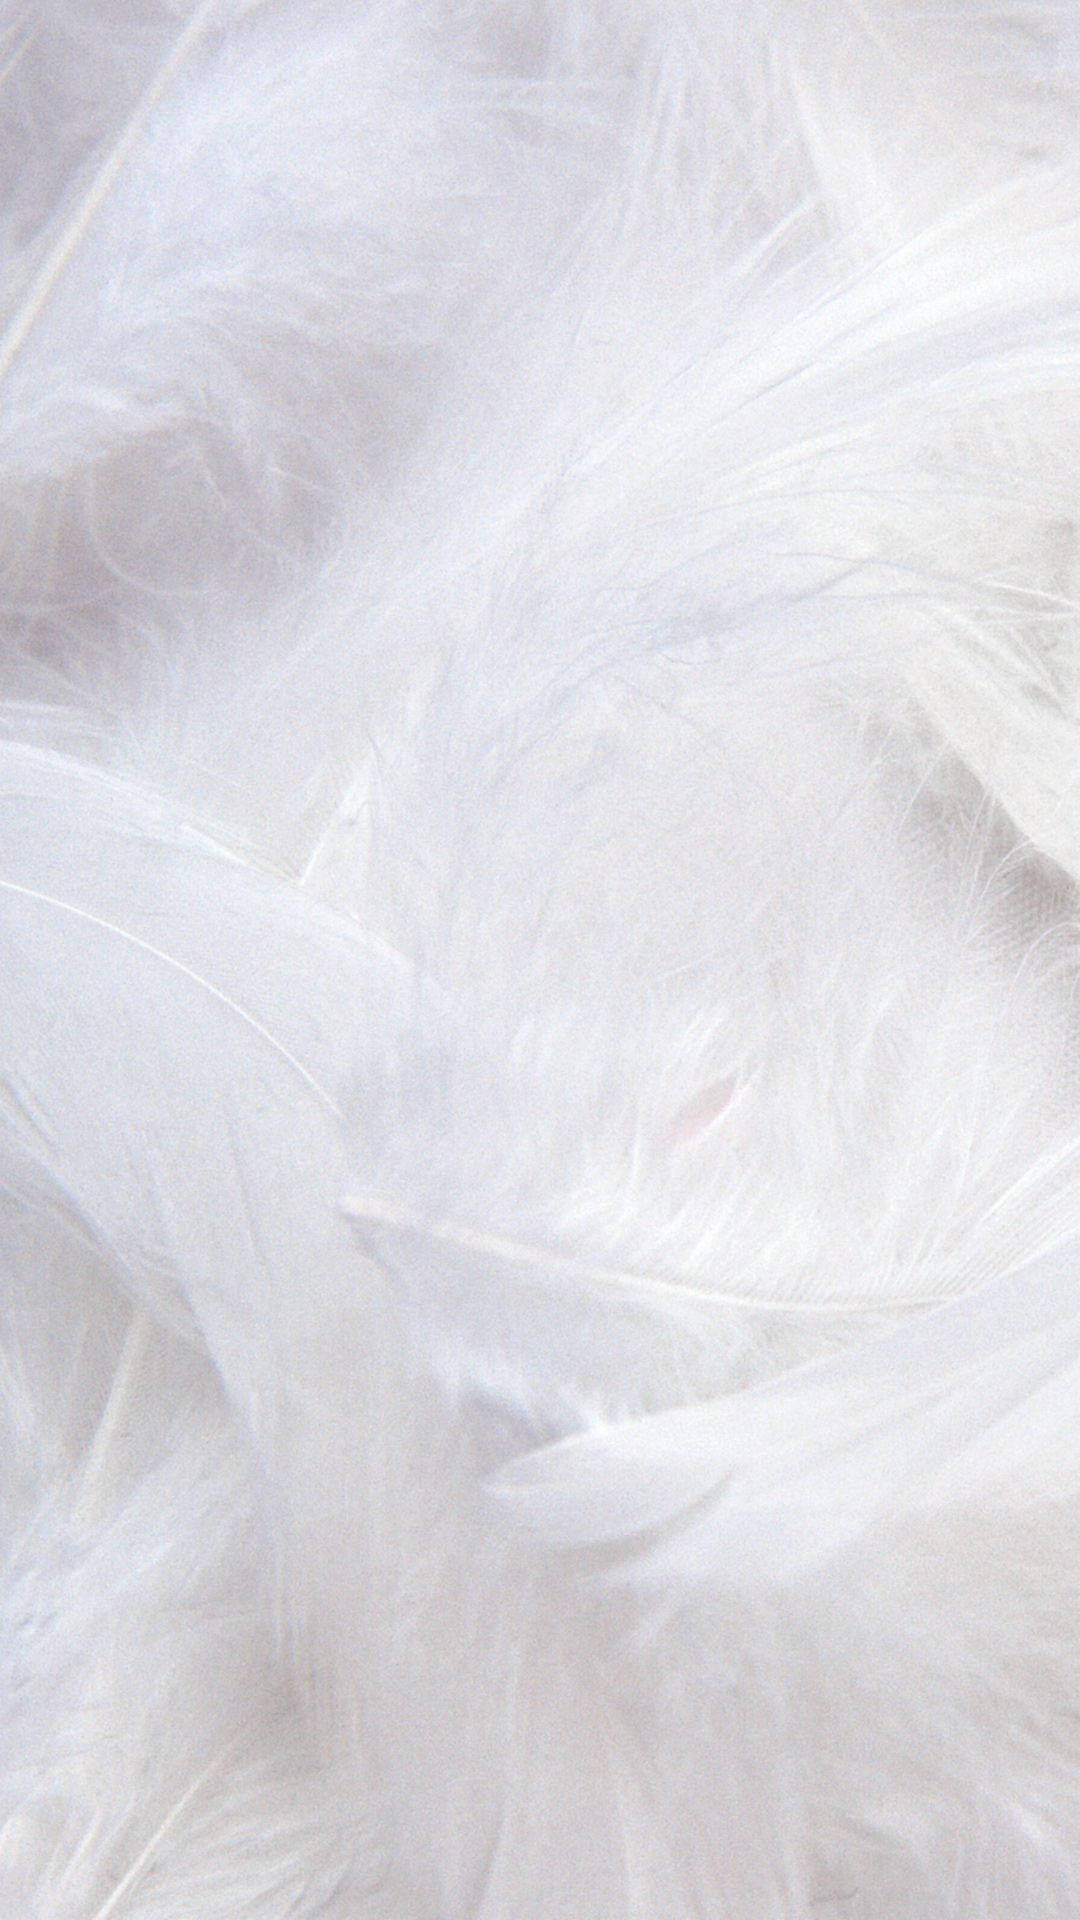 Cool Iphone White Feathers Wallpaper